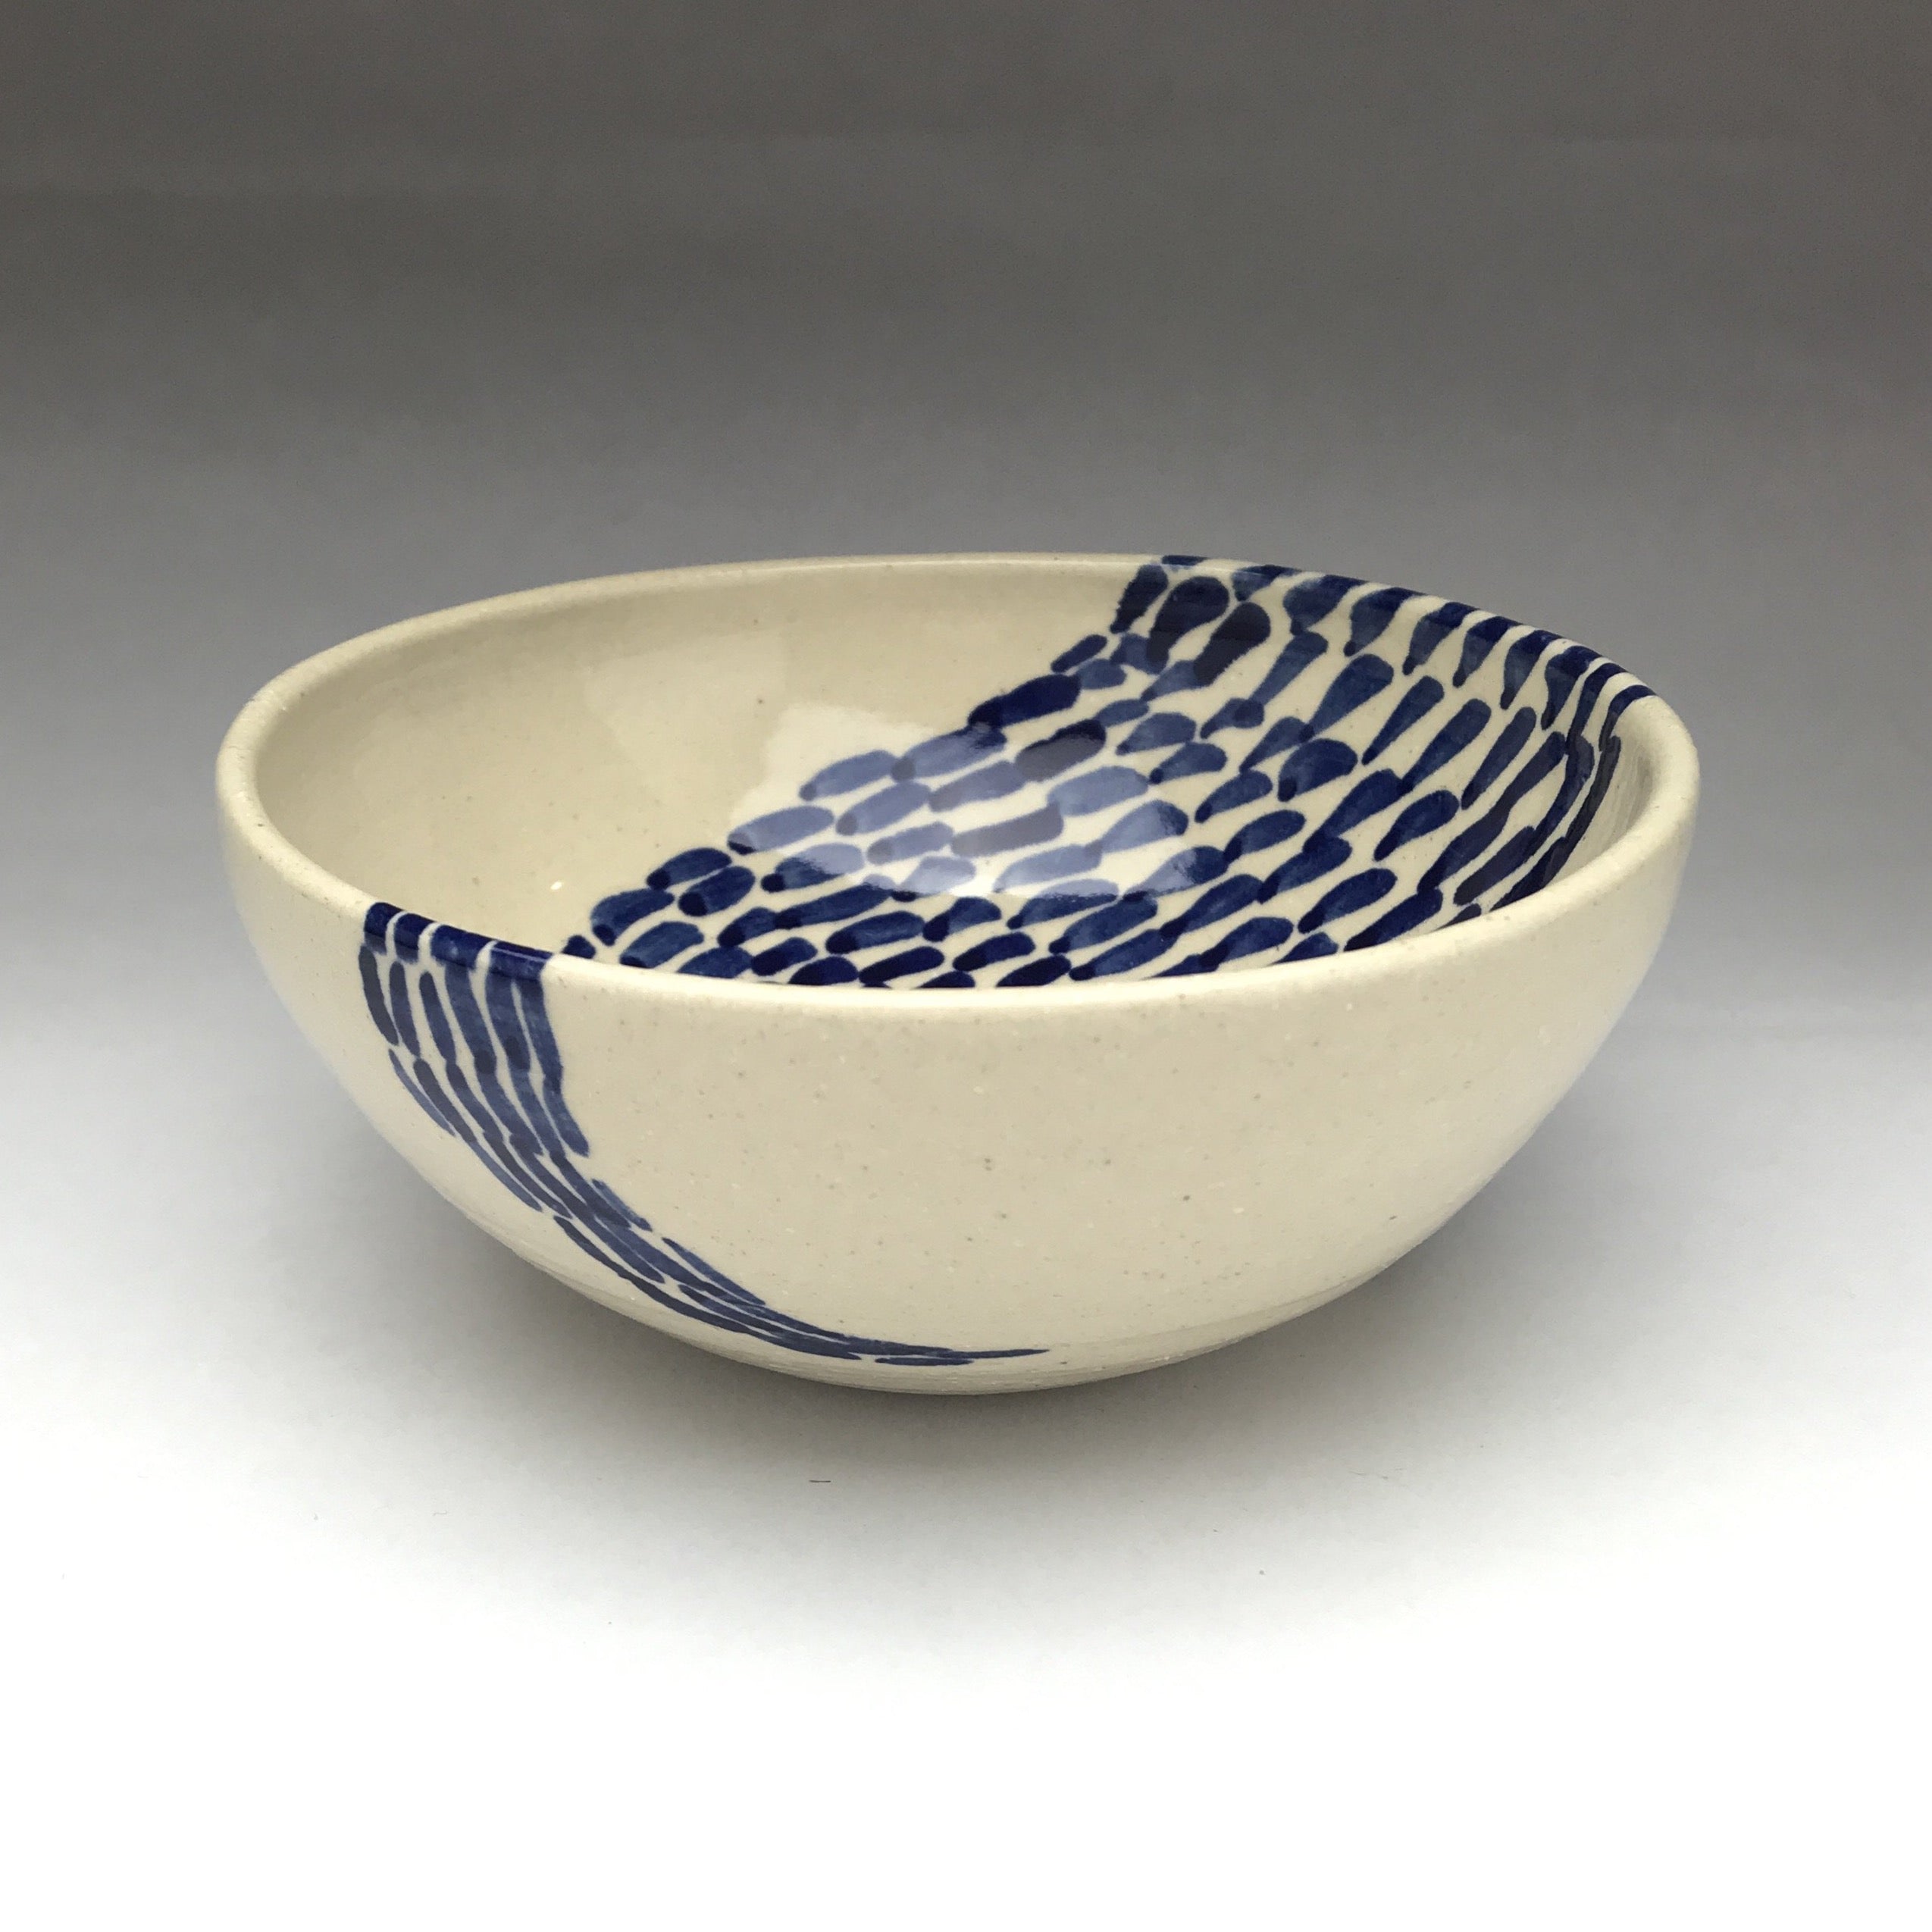 white ceramic bowl with cobalt blue patterns of lines and dots